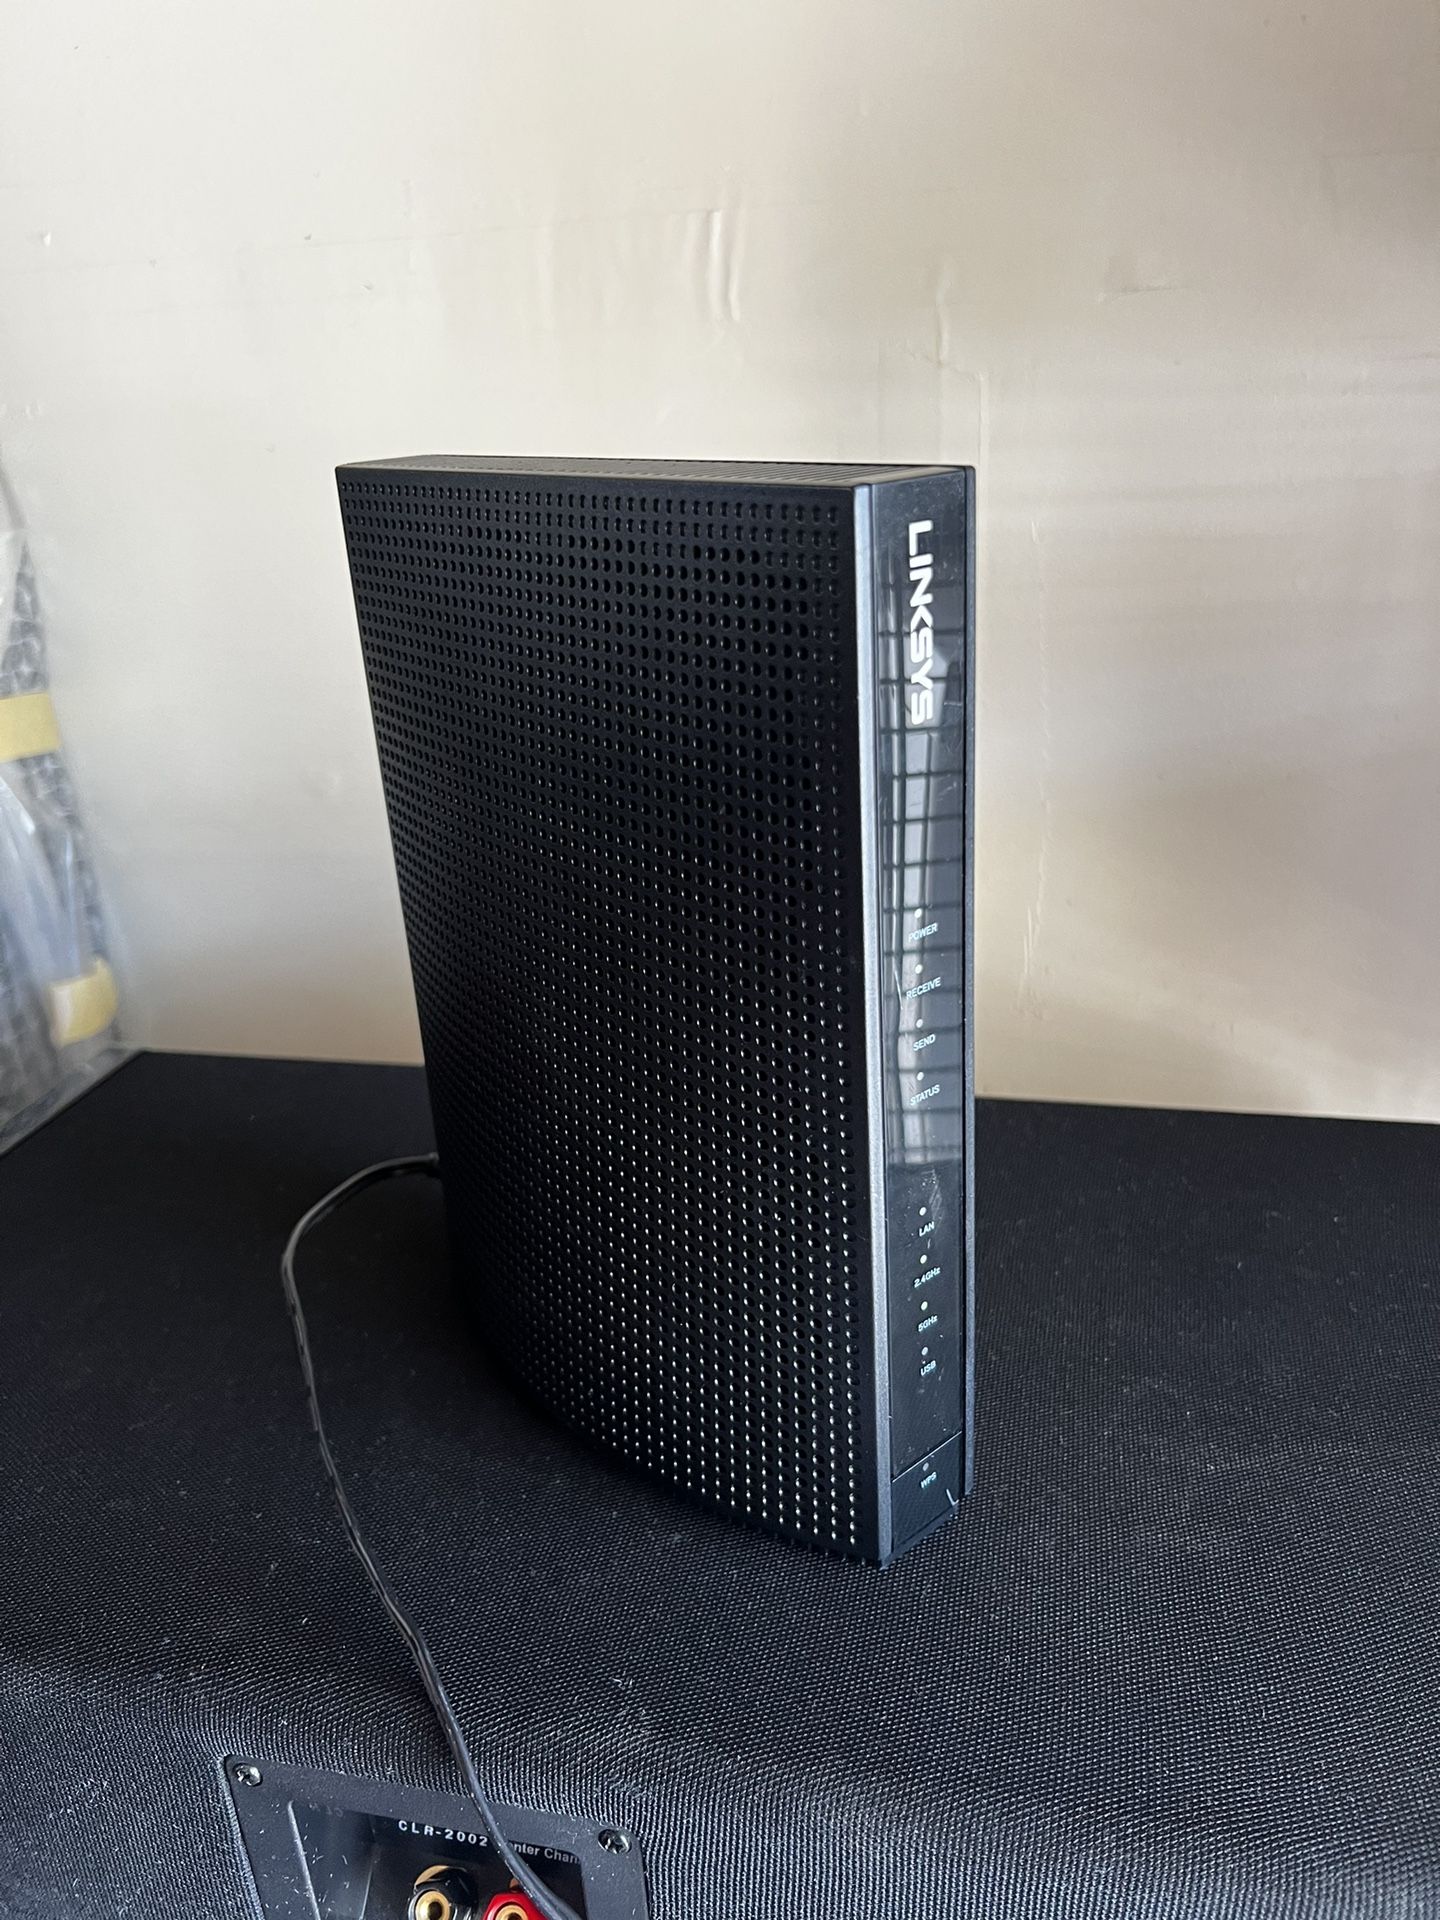 LinkSys CG7500 - Cable Modem, Router and Wireless Router 